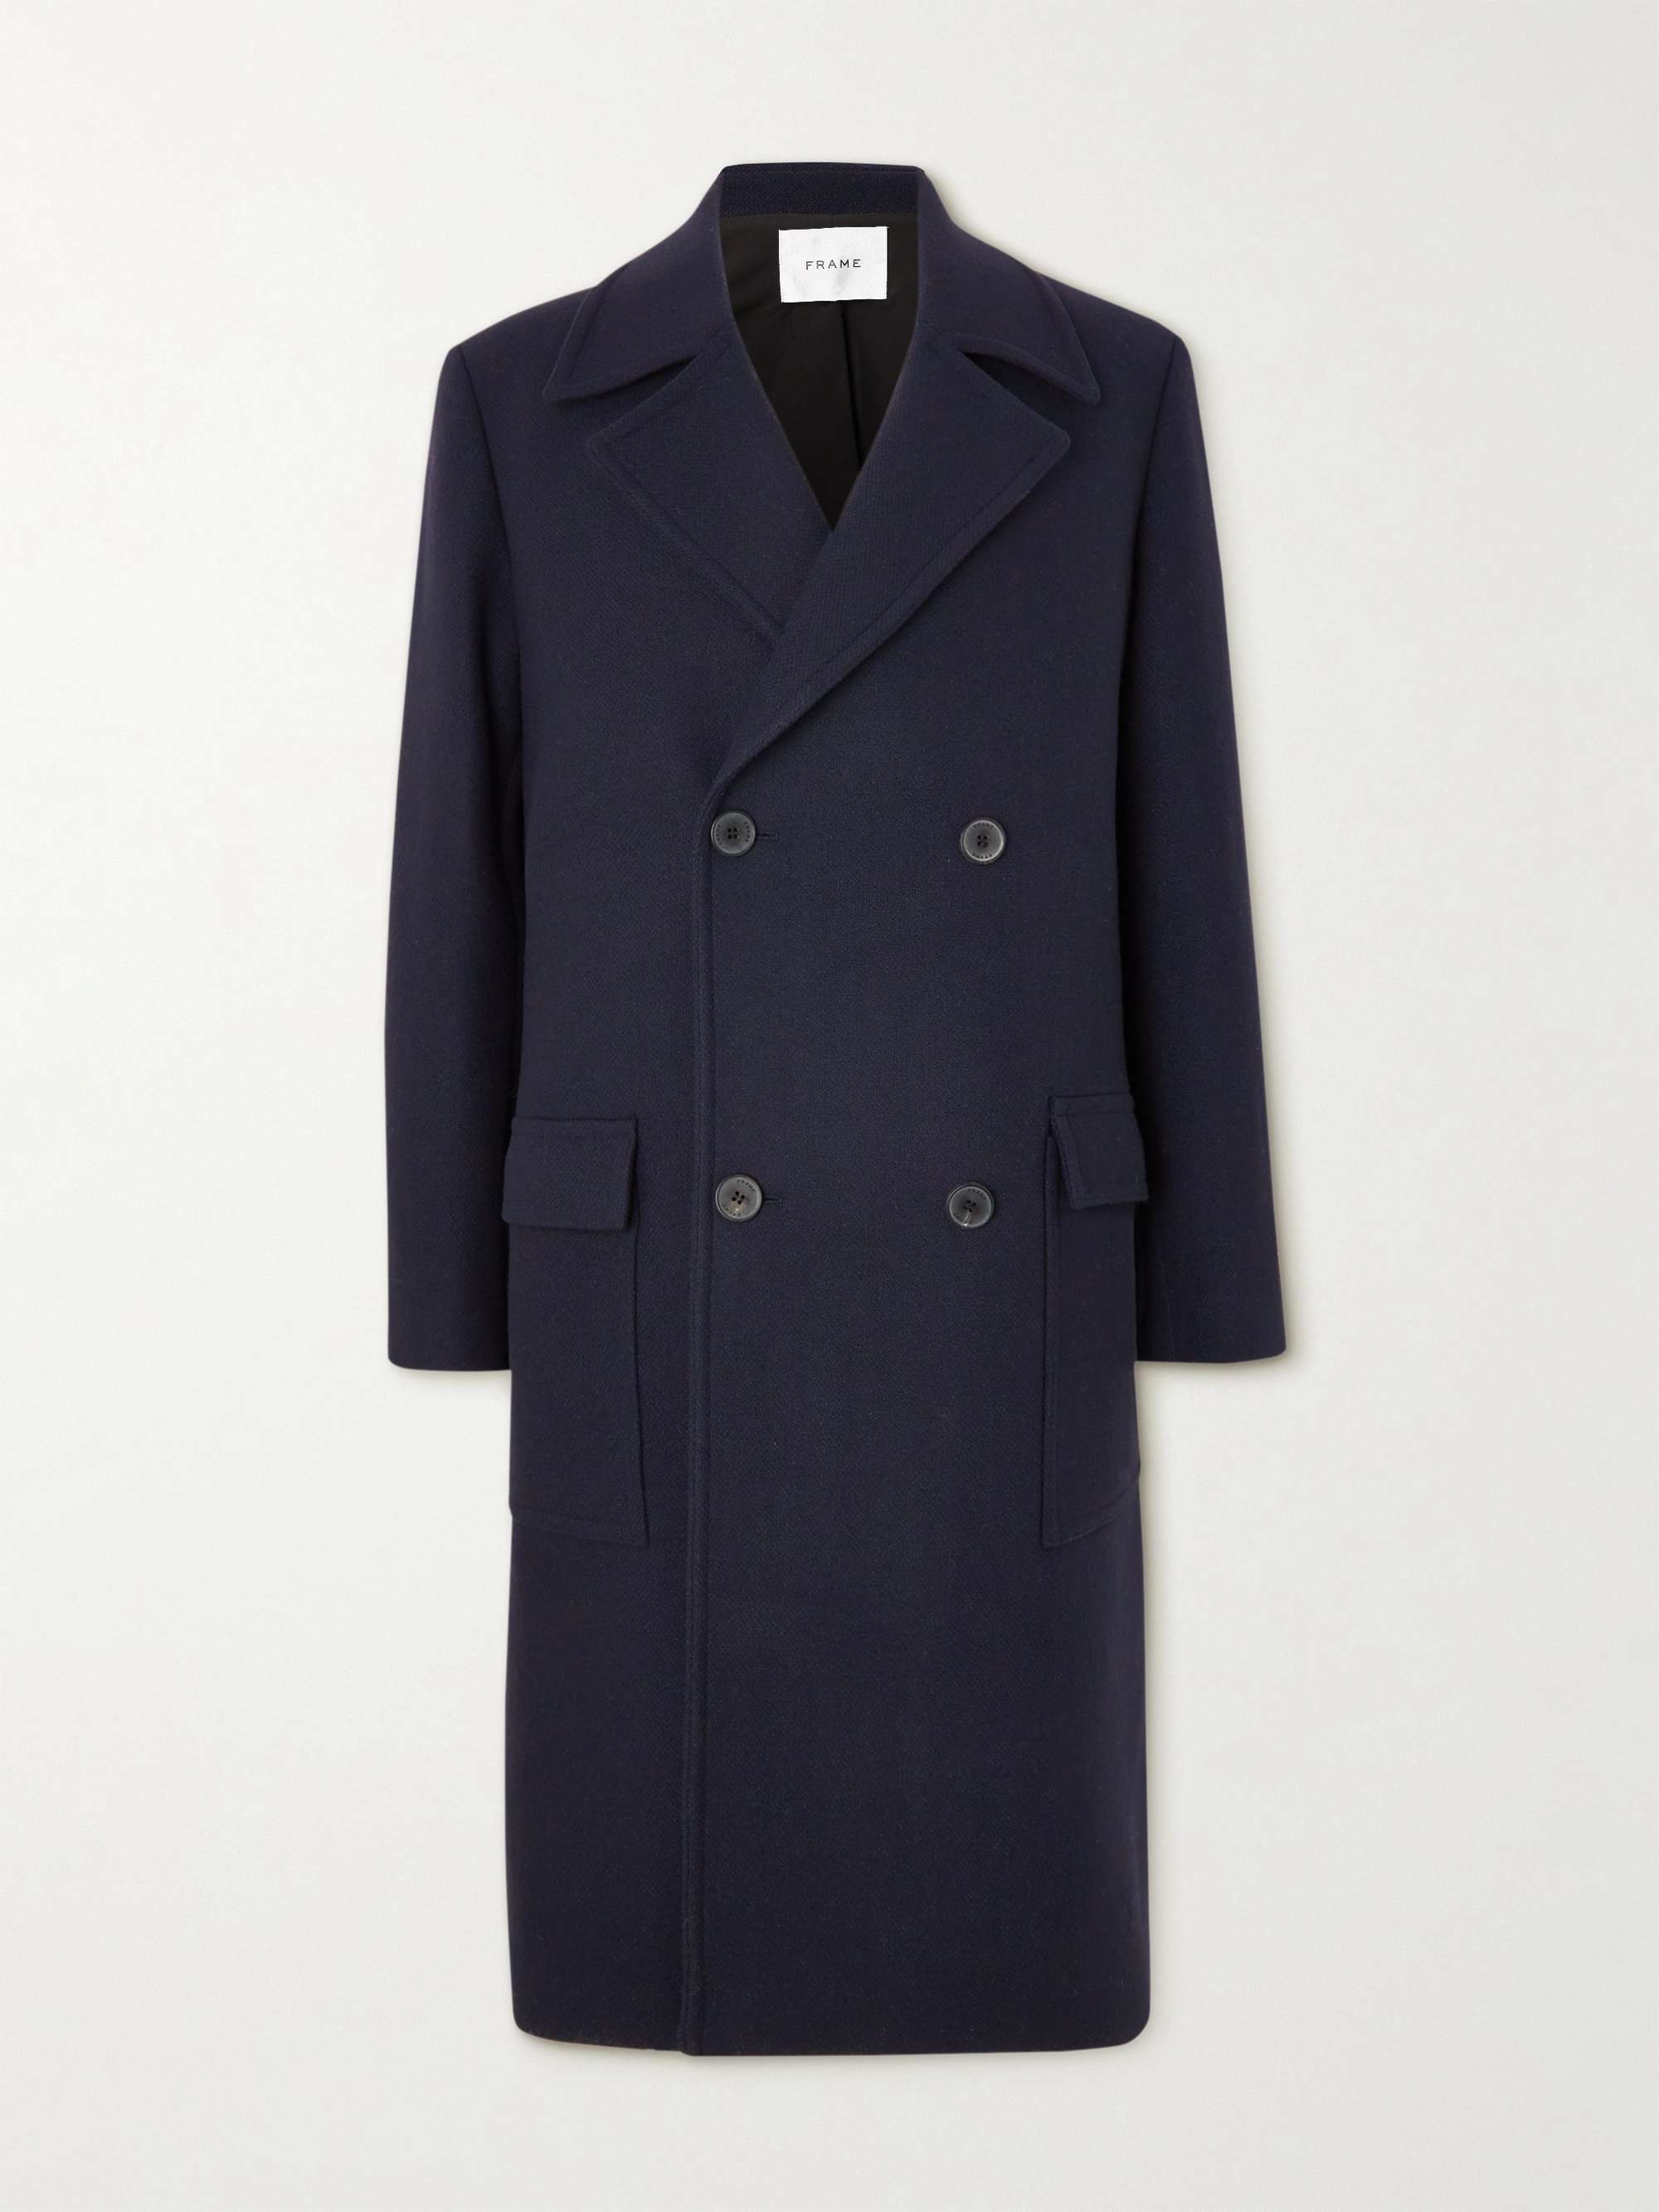 FRAME Double-Breasted Wool-Blend Overcoat